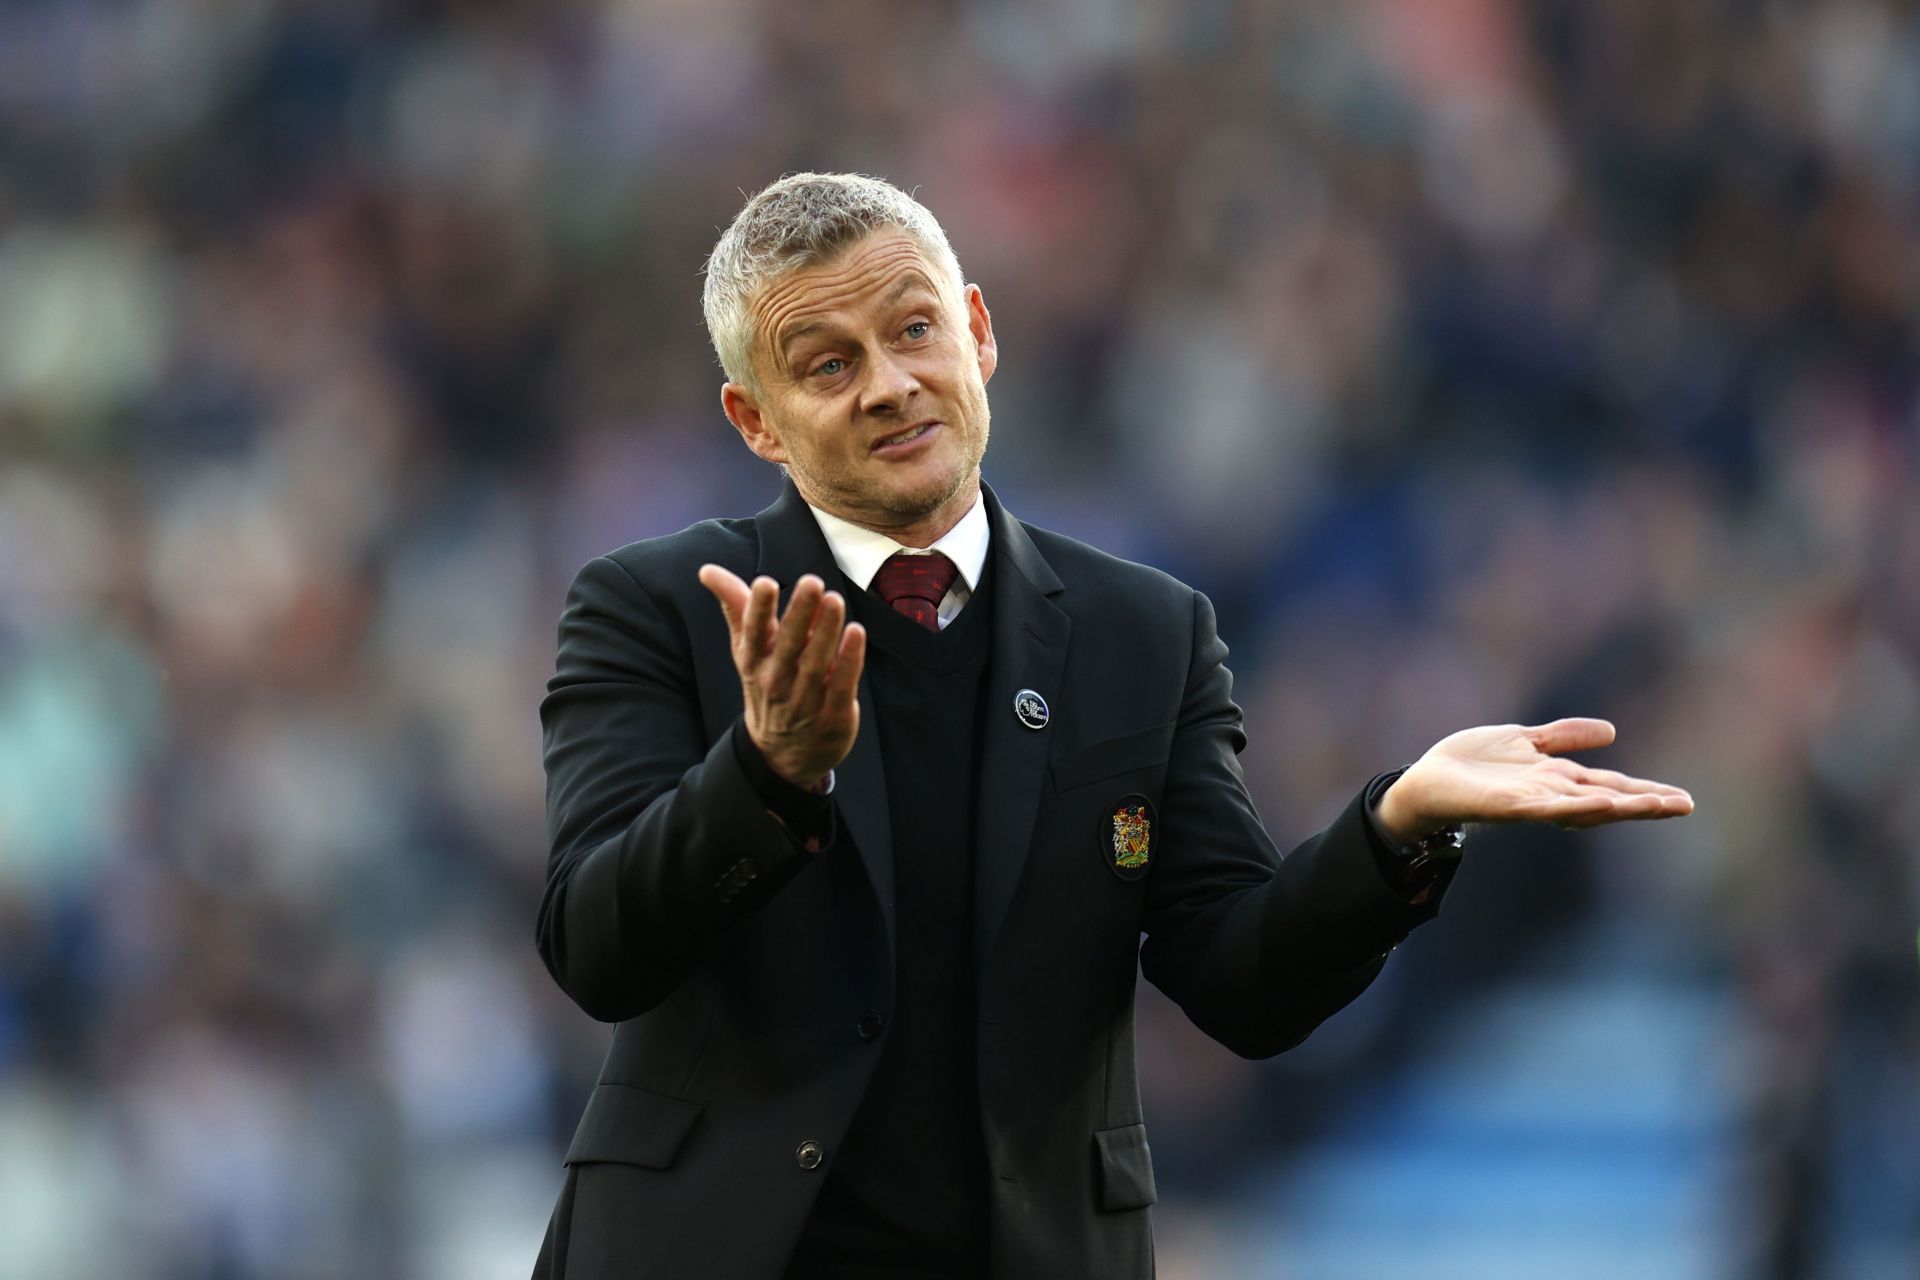 Ole Gunnar Solskjaer might be sacked in the coming months.